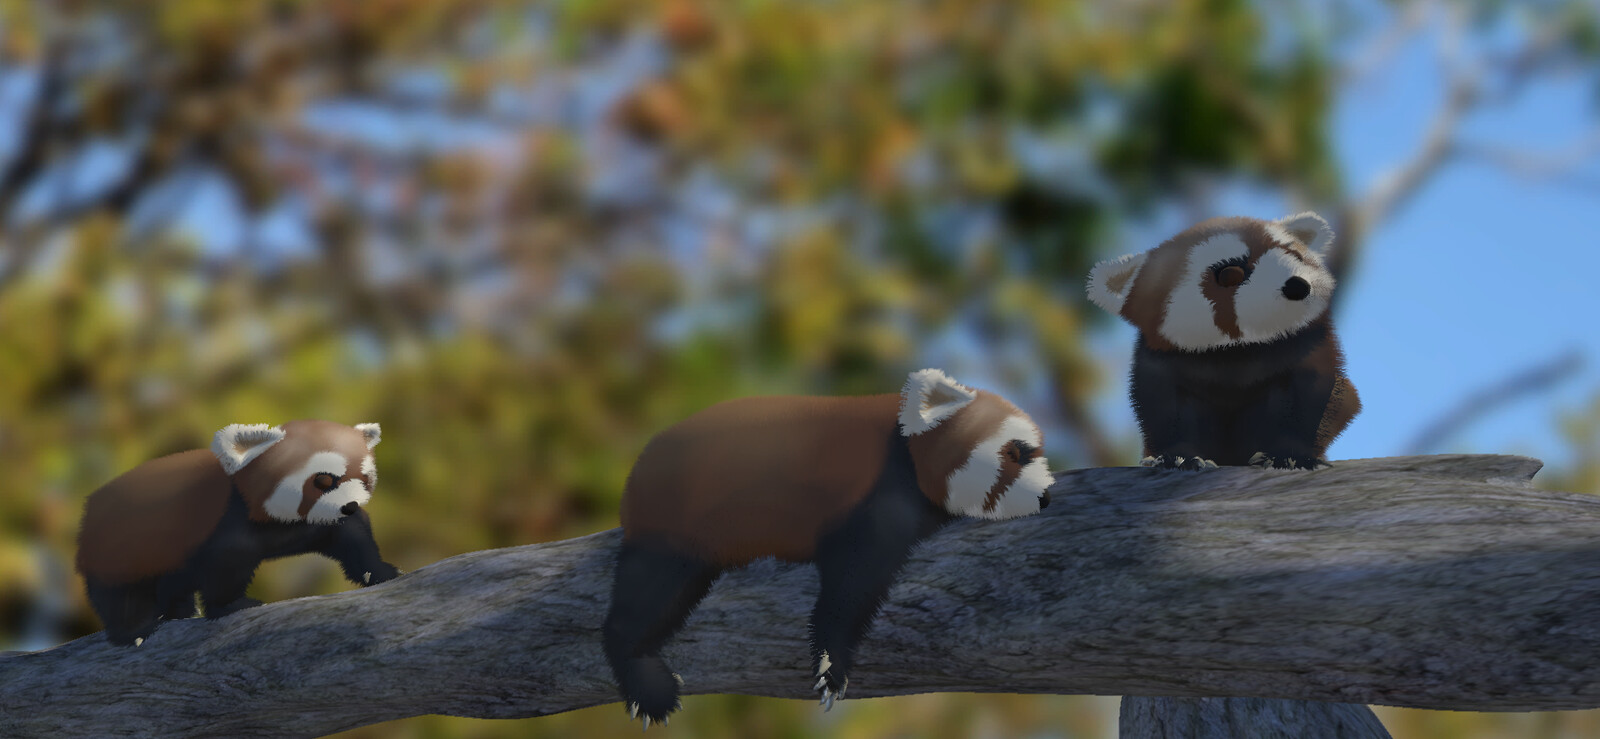 Red pandas in Unity #1. The panda model is rigged so it can move its head, legs, tail, etc